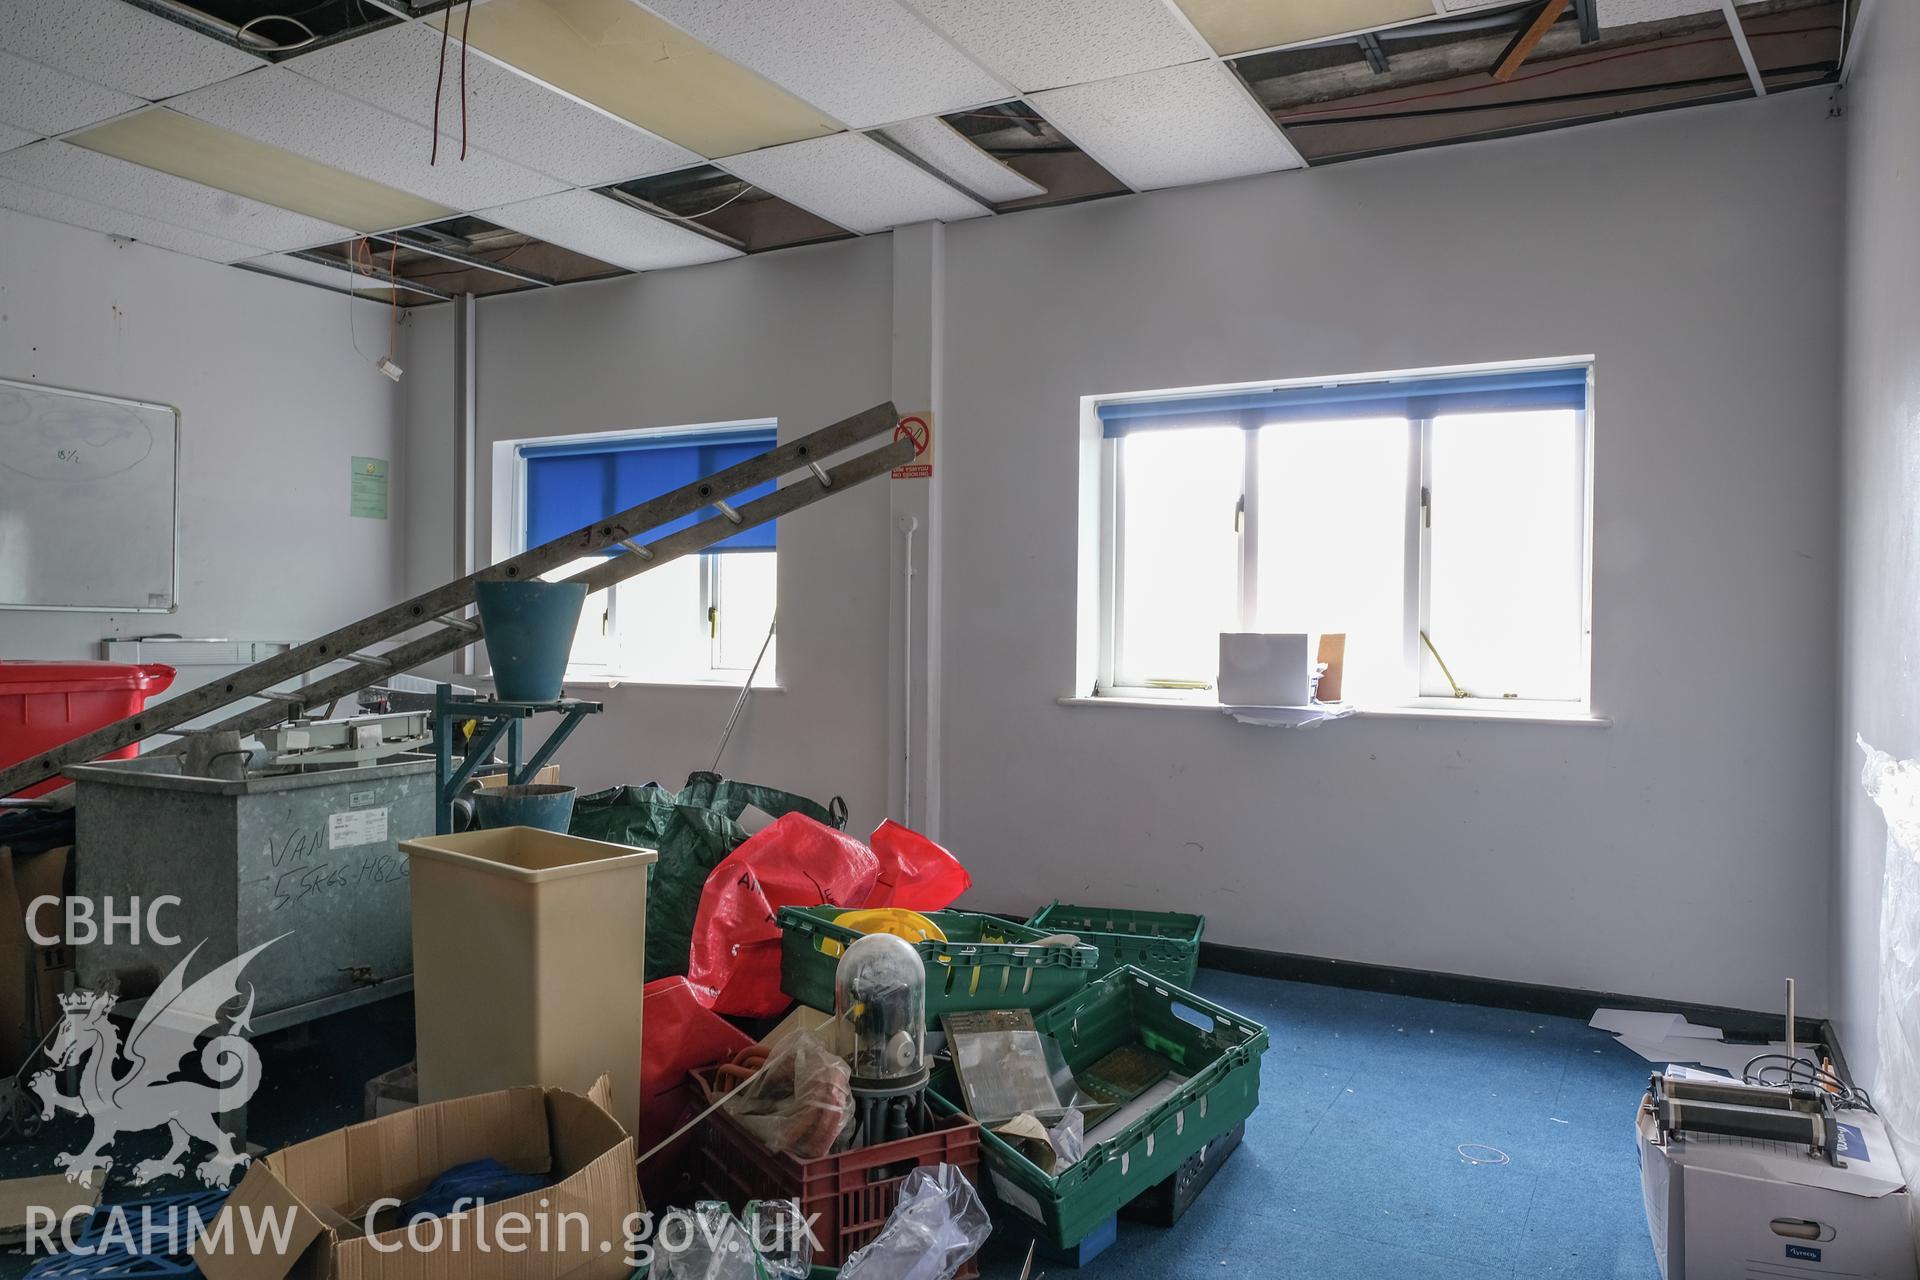 Digital colour photograph showing detailed interior view of classroom at Caernarfonshire Technical College, Ffriddoedd Road, Bangor. Photographed by Dilys Morgan and donated by Wyn Thomas of Grwp Llandrillo-Menai Further Education College, 2019.